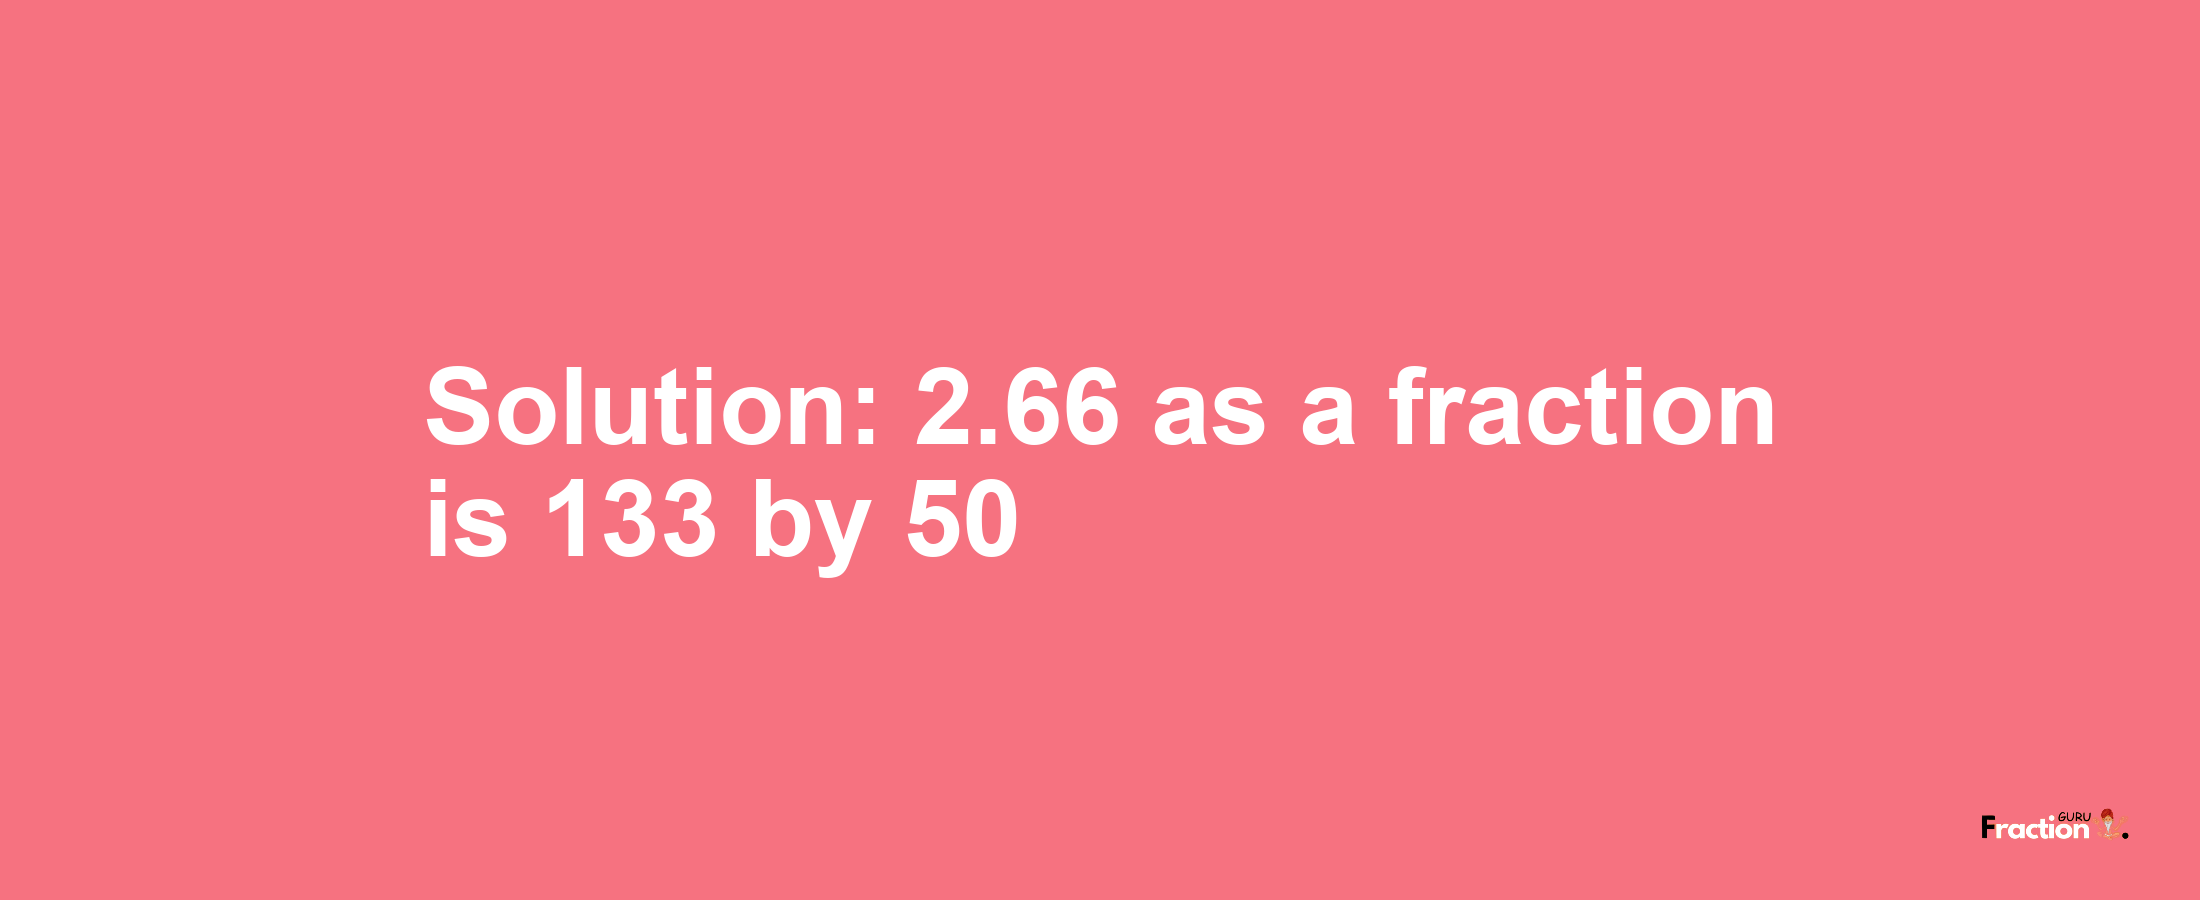 Solution:2.66 as a fraction is 133/50